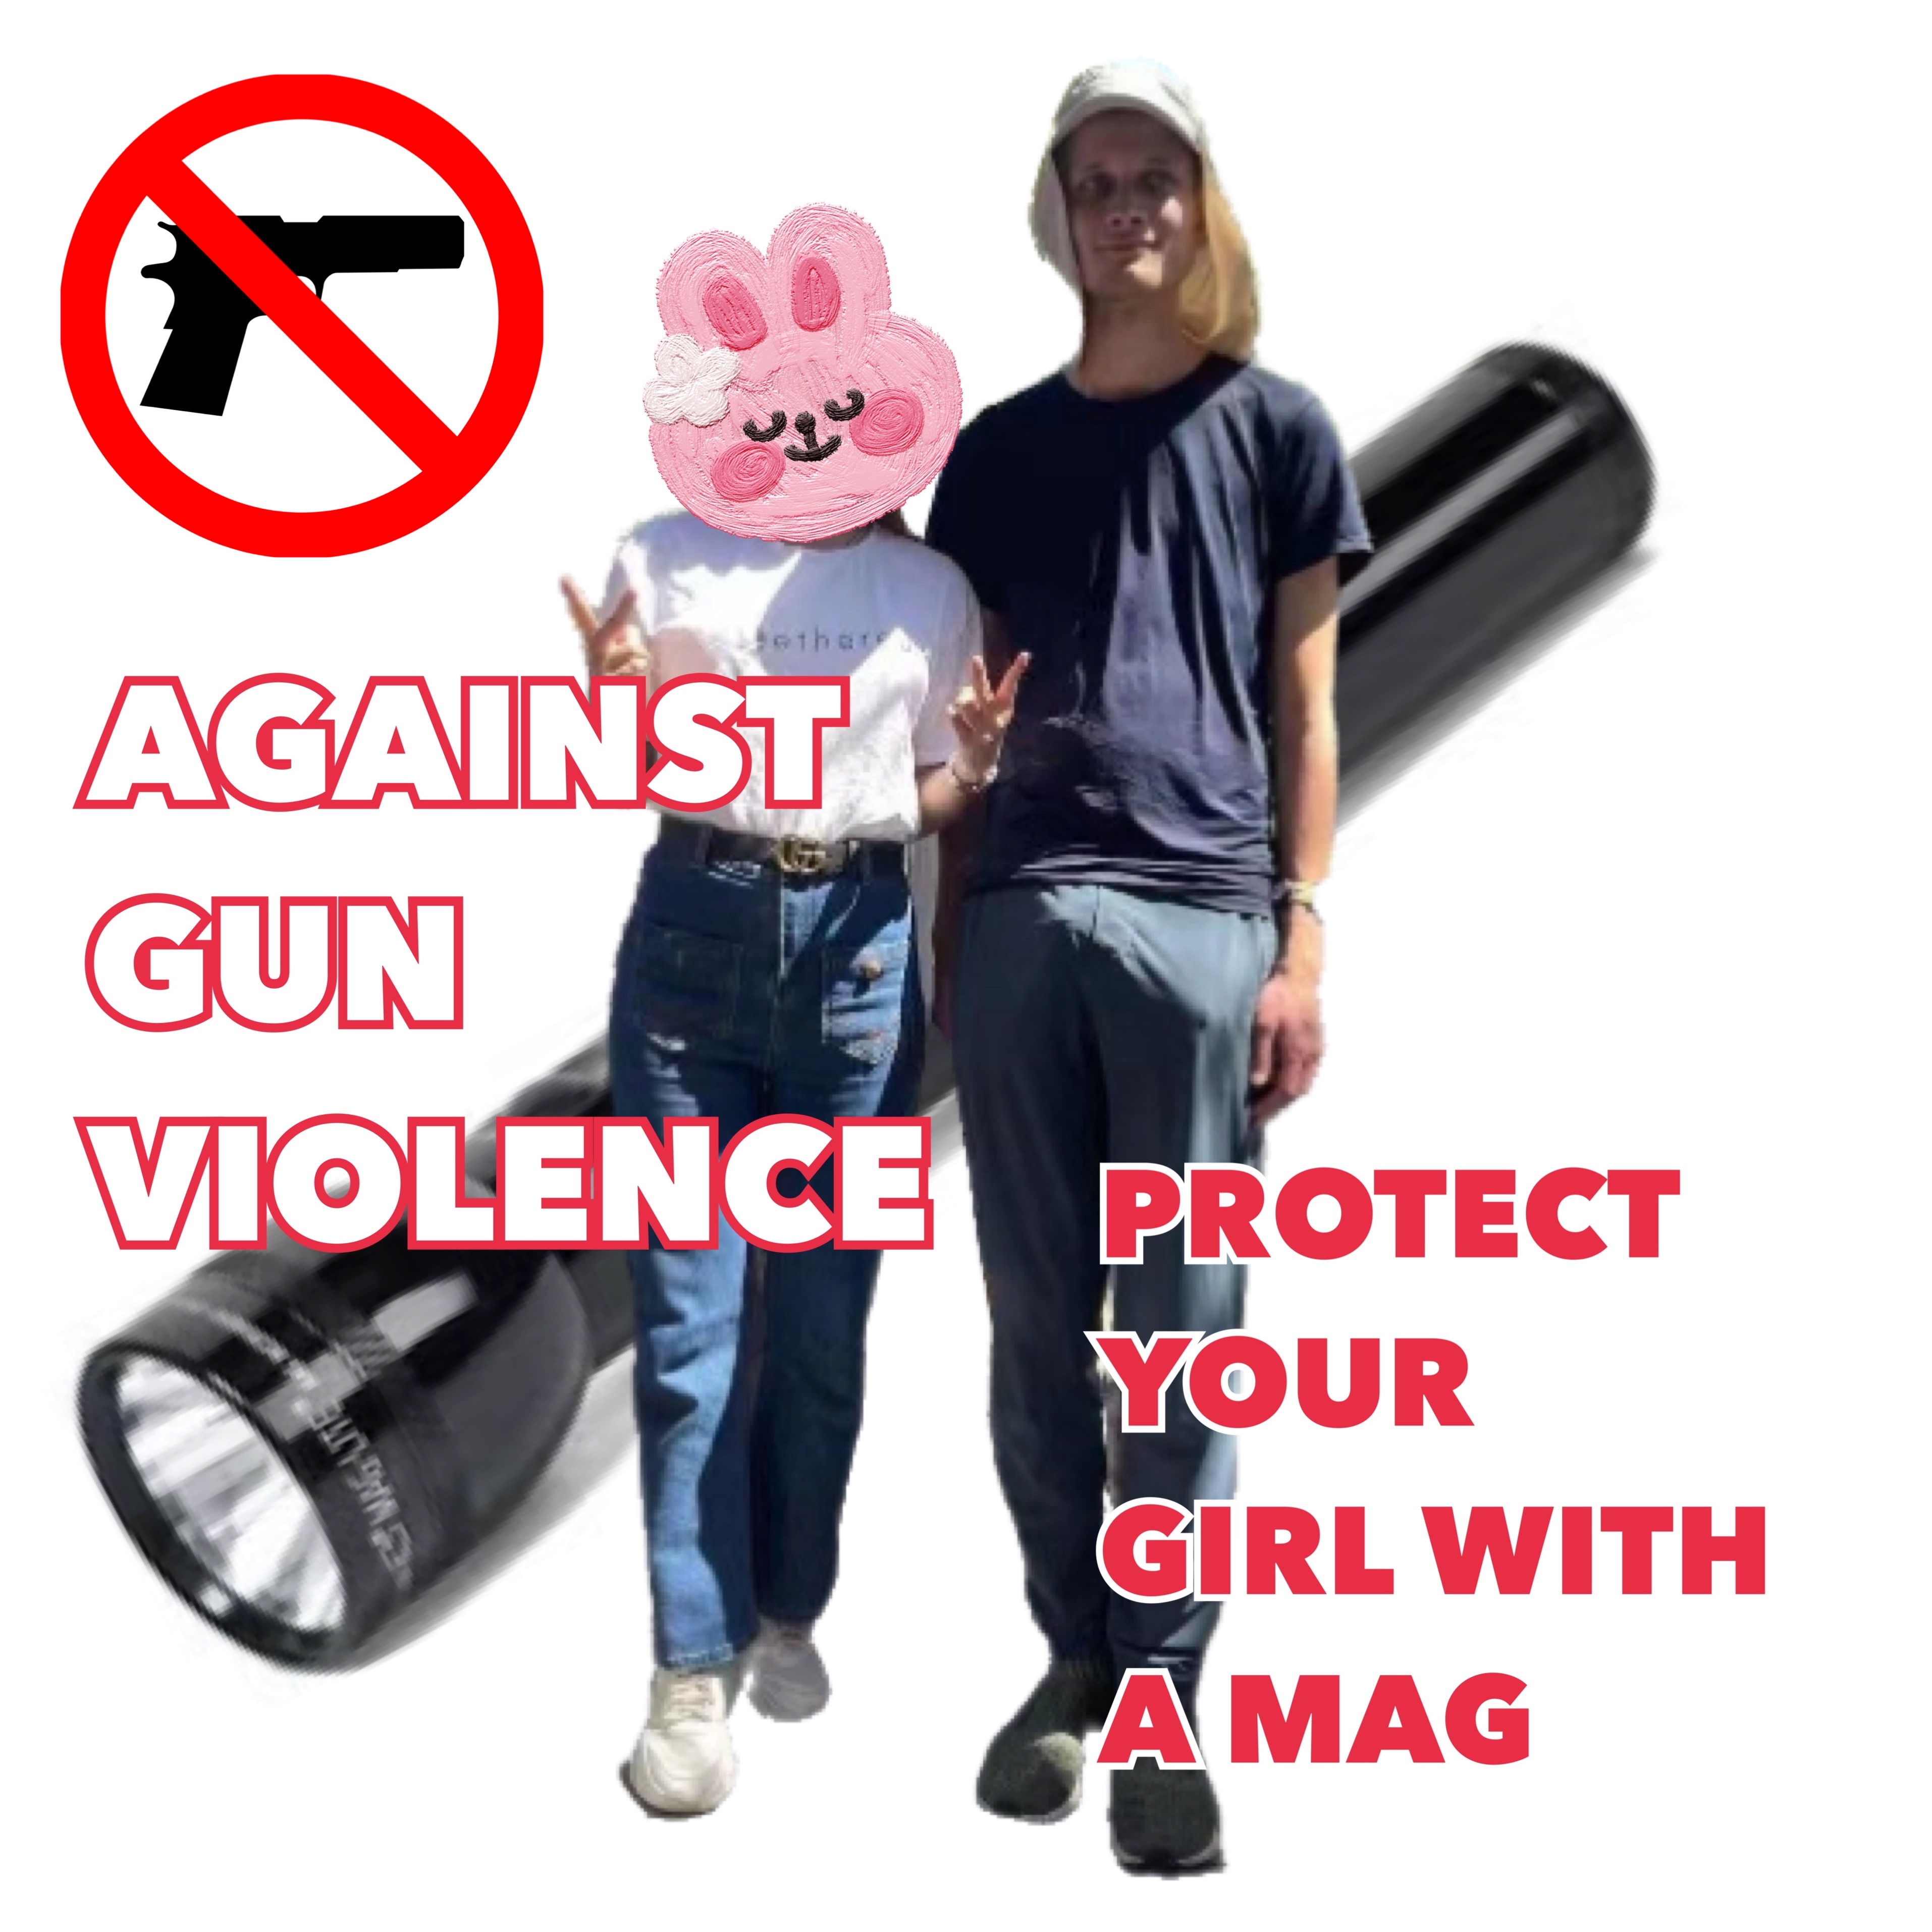 against gun violence - protect your girl with a mag